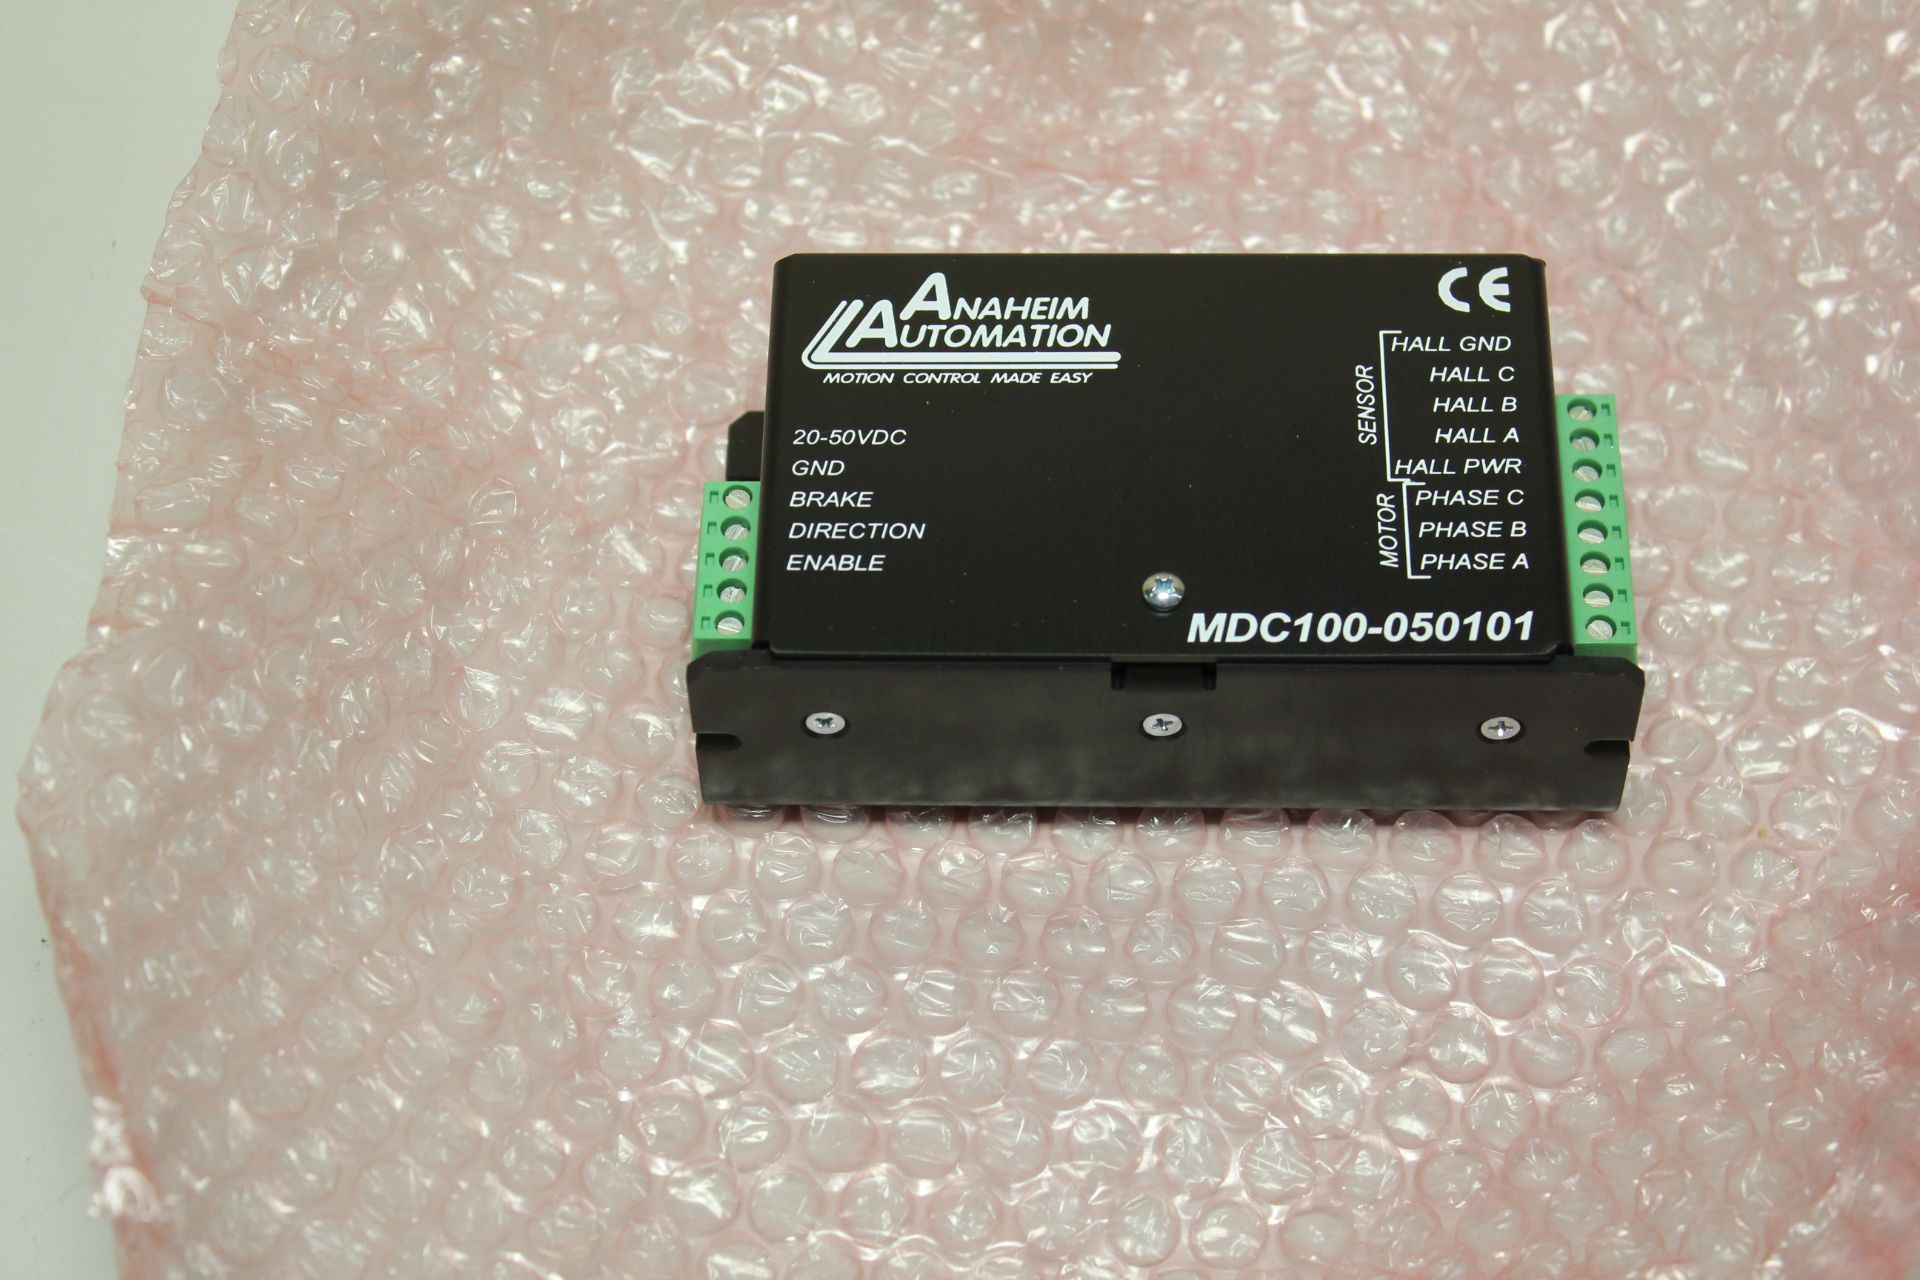 NEW ANAHEIM AUTOMATION BRUSHLESS DC MOTOR SPEED CONTROLLER